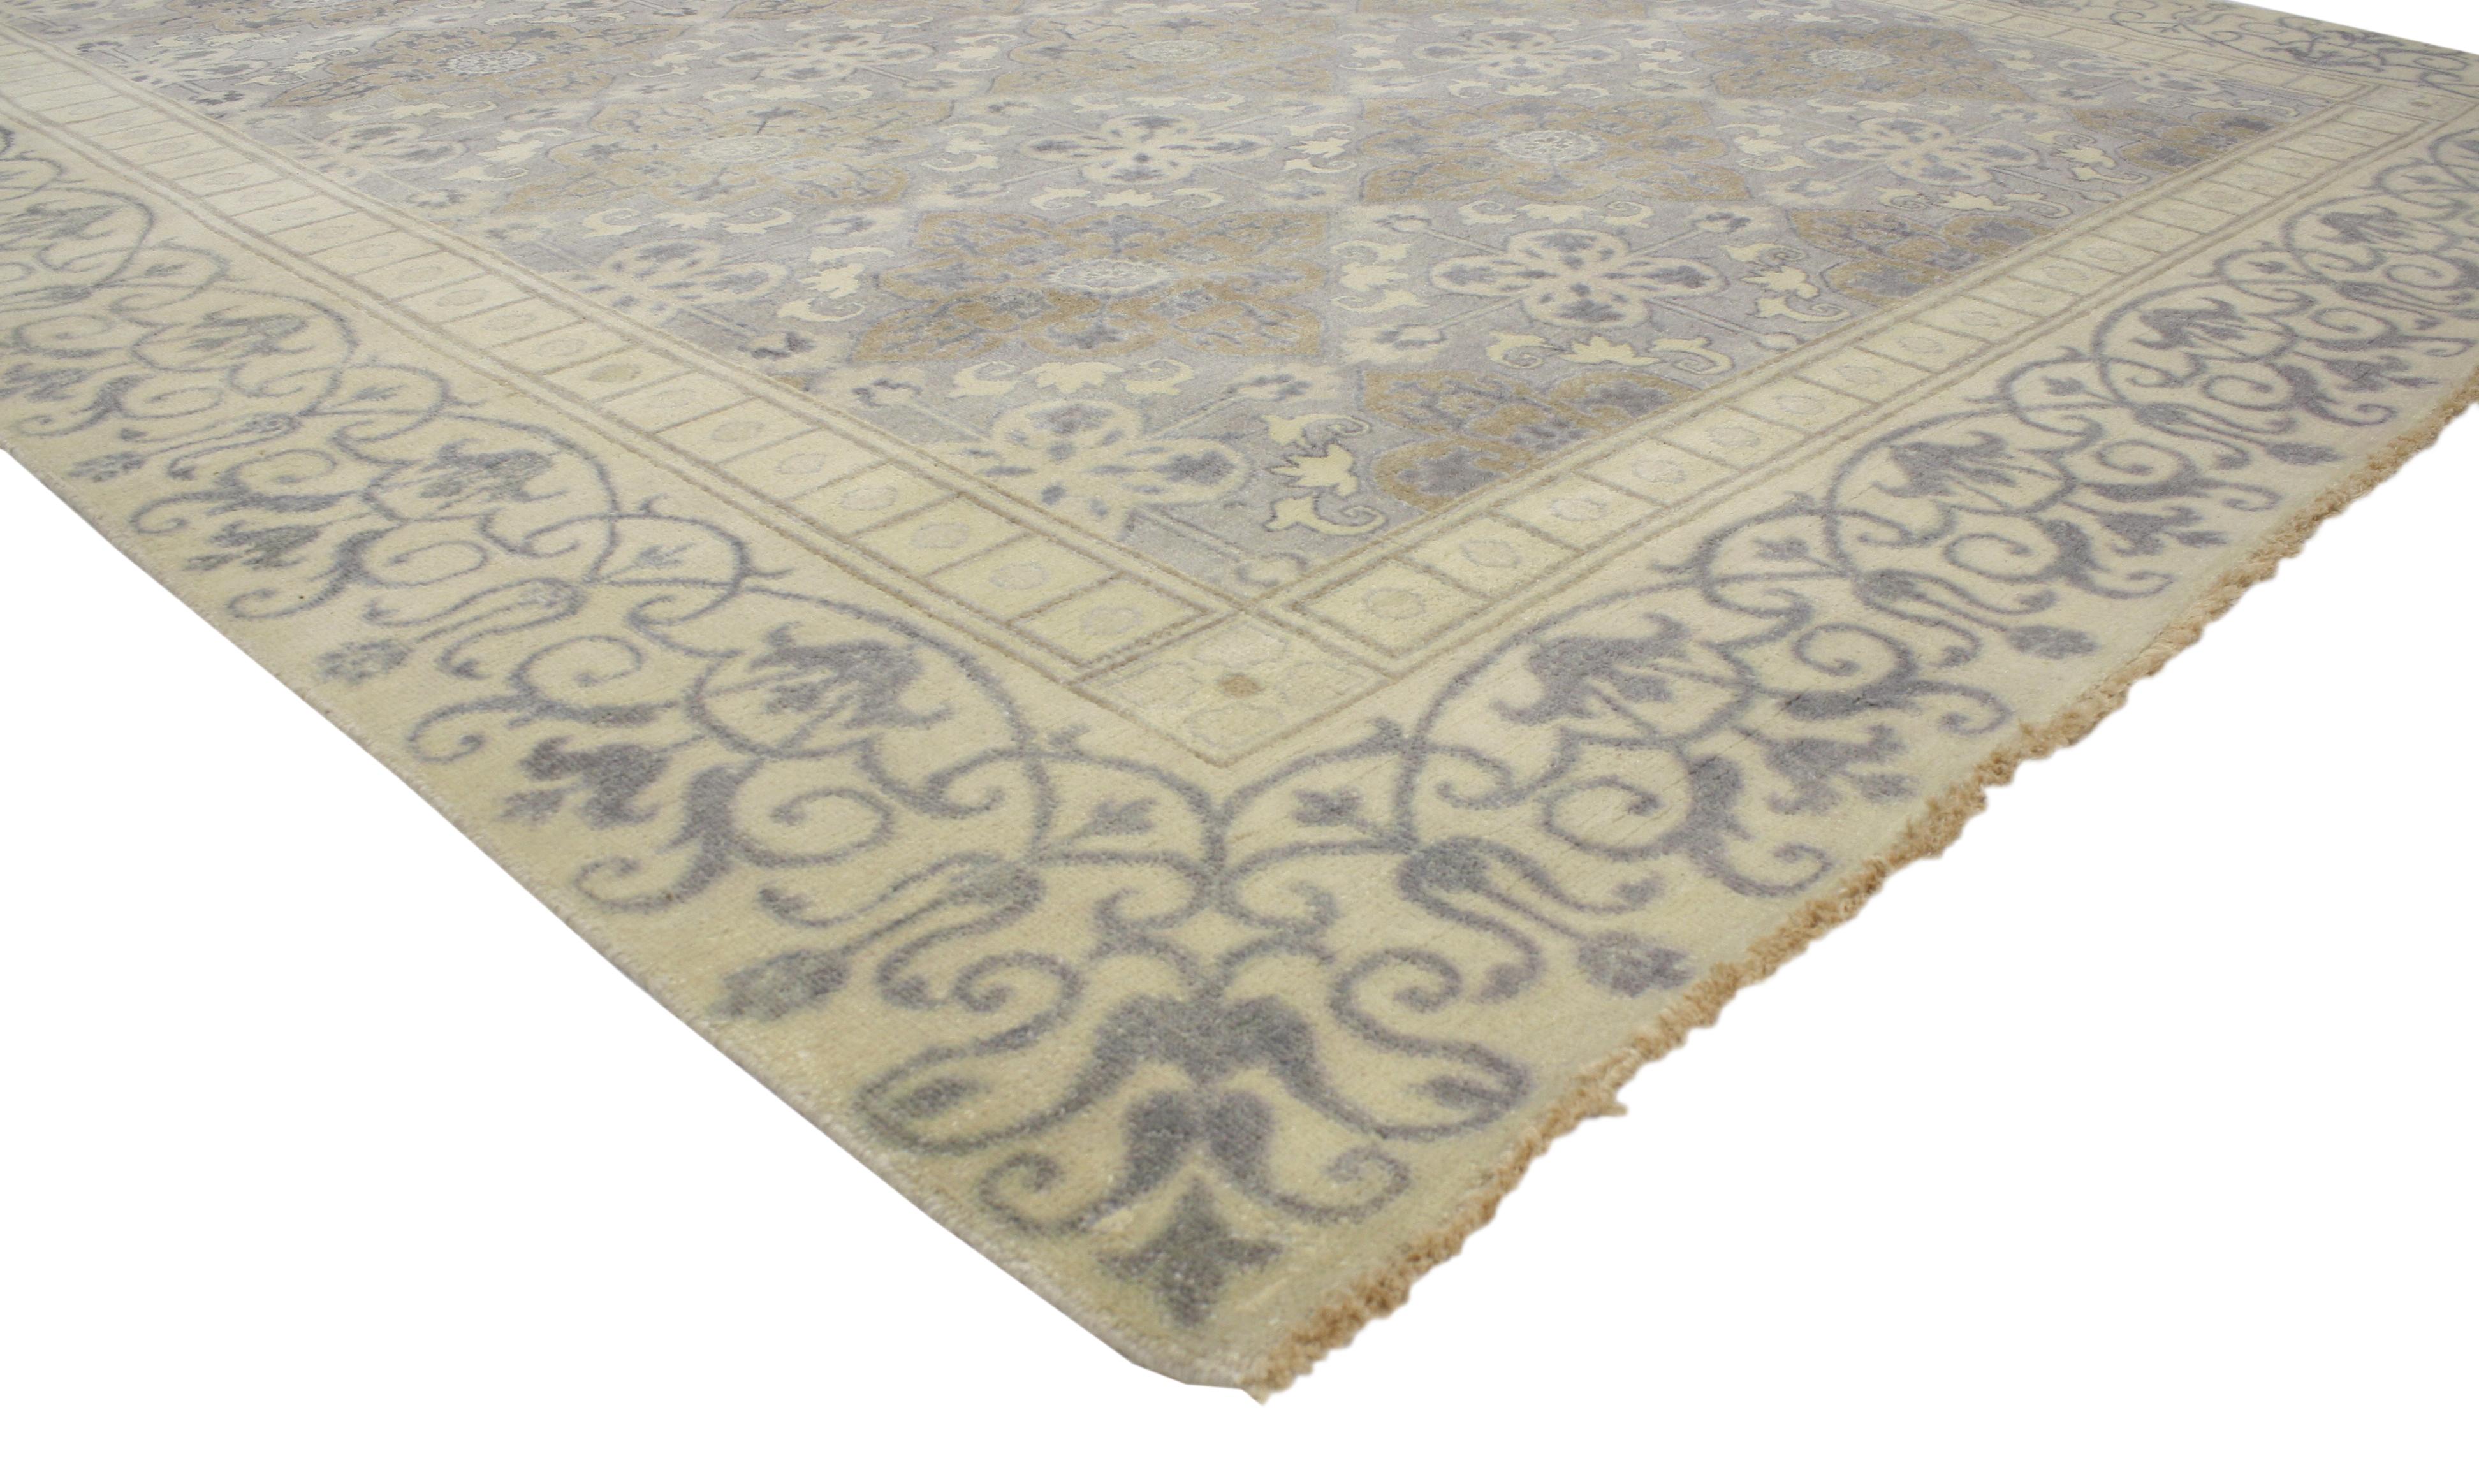 30341 New Transitional Area Rug with Khotan Pattern and Modernist Neoclassic Style 09'00 x 10'07. This hand-knotted wool Khotan design rug with traditional modern style features an all-over pattern of lobed diamond medallions alternating with